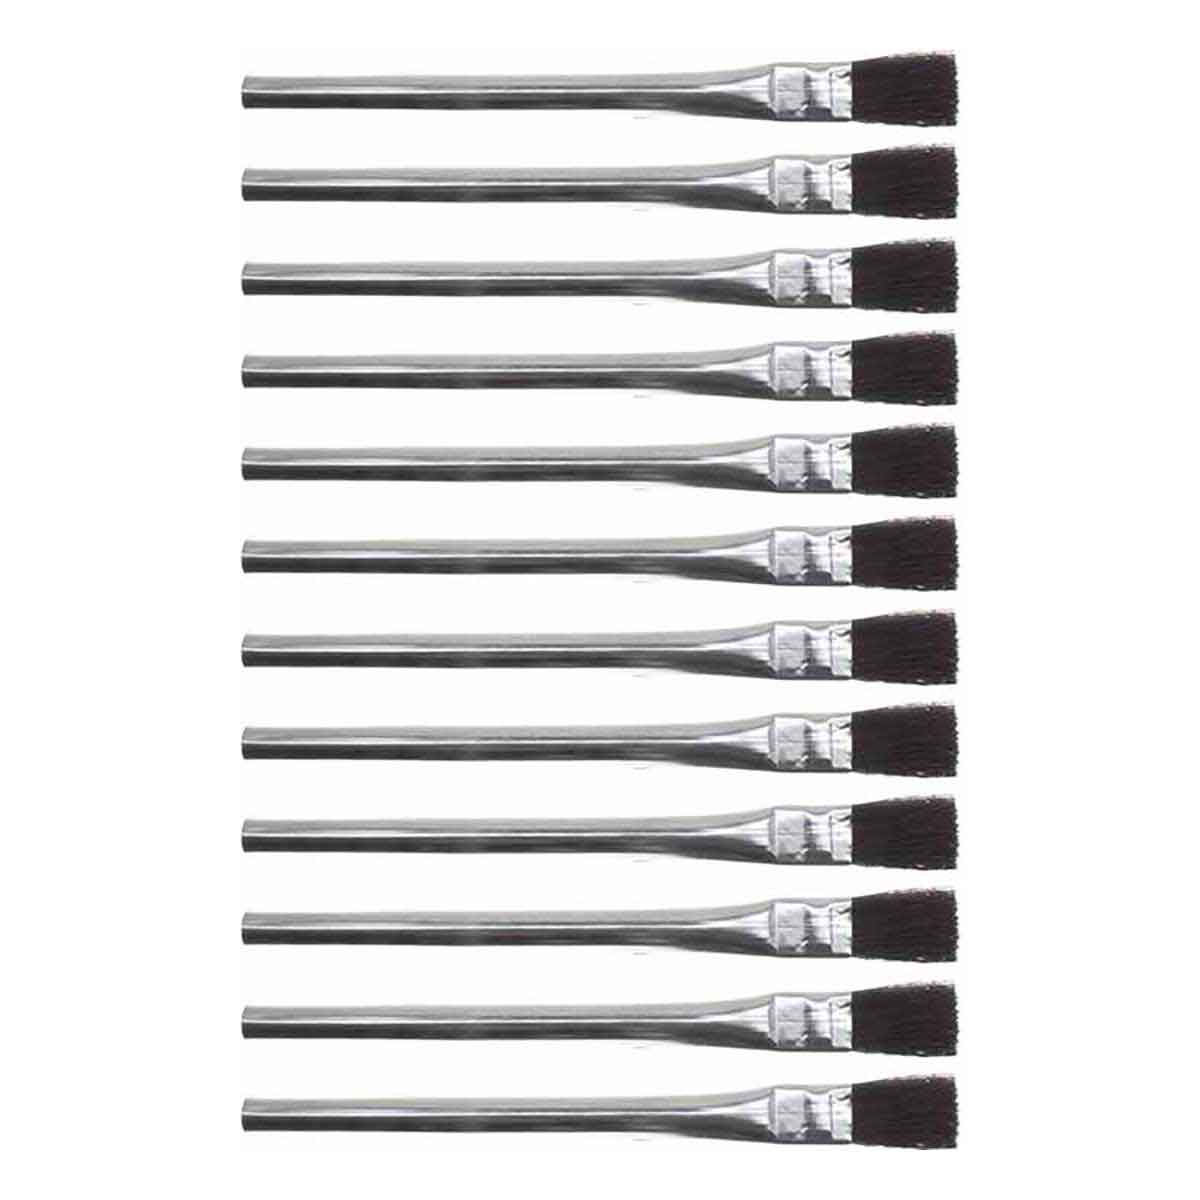 Acid Brushes Approximately 5 in. long and 1/2 in. wide 3 Piece